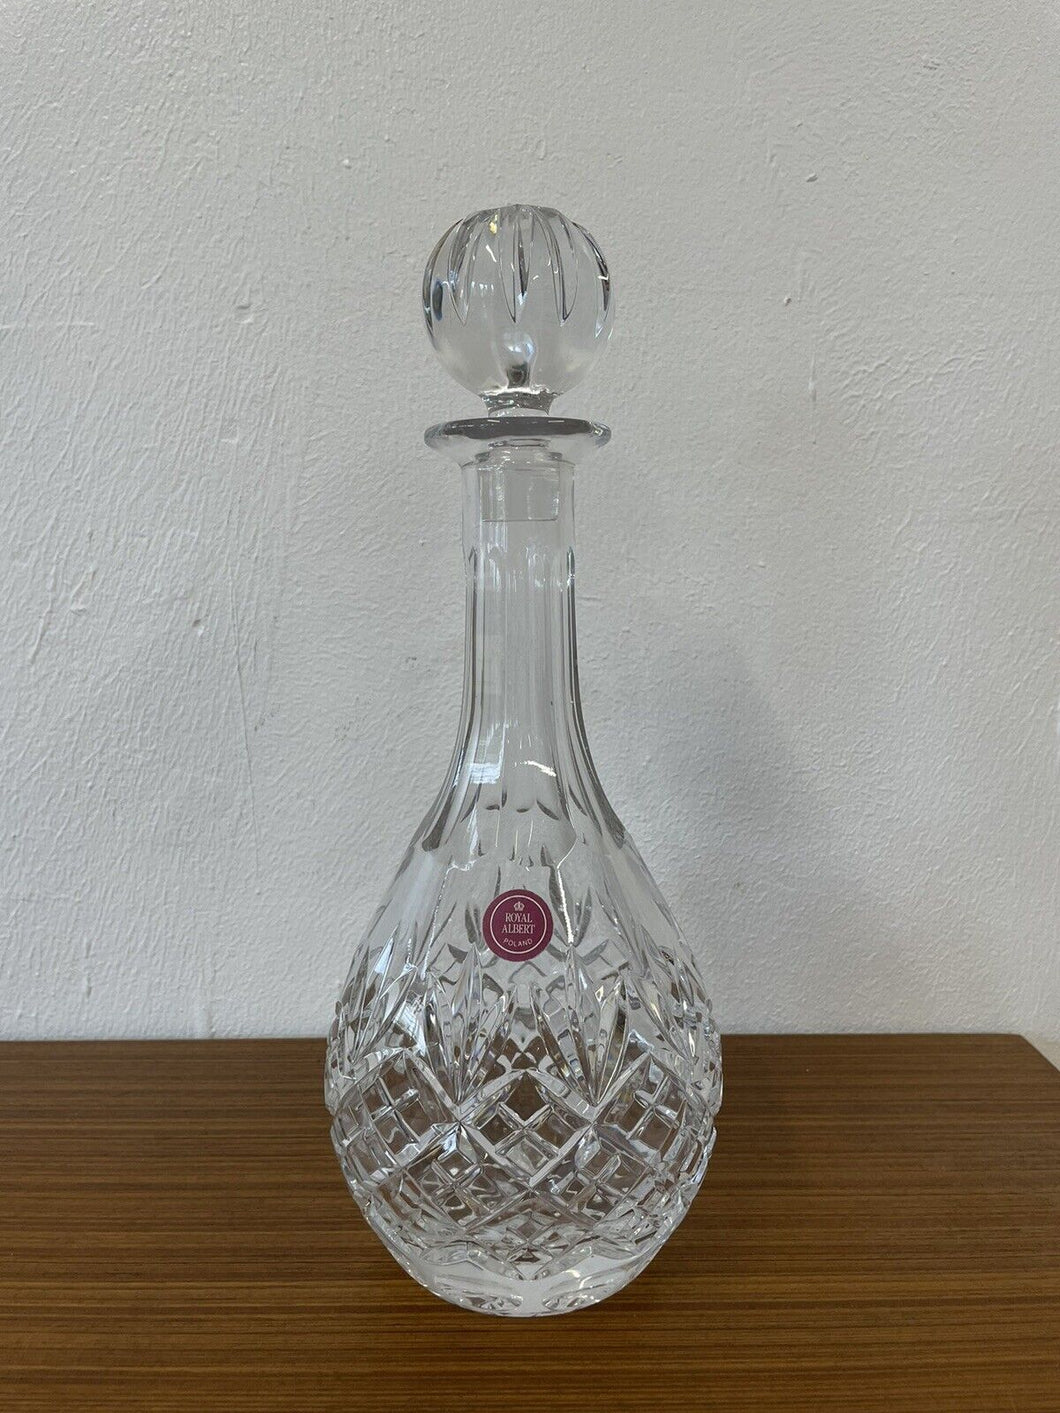 Royal Albert Cut Crystal Decanter And Stopper